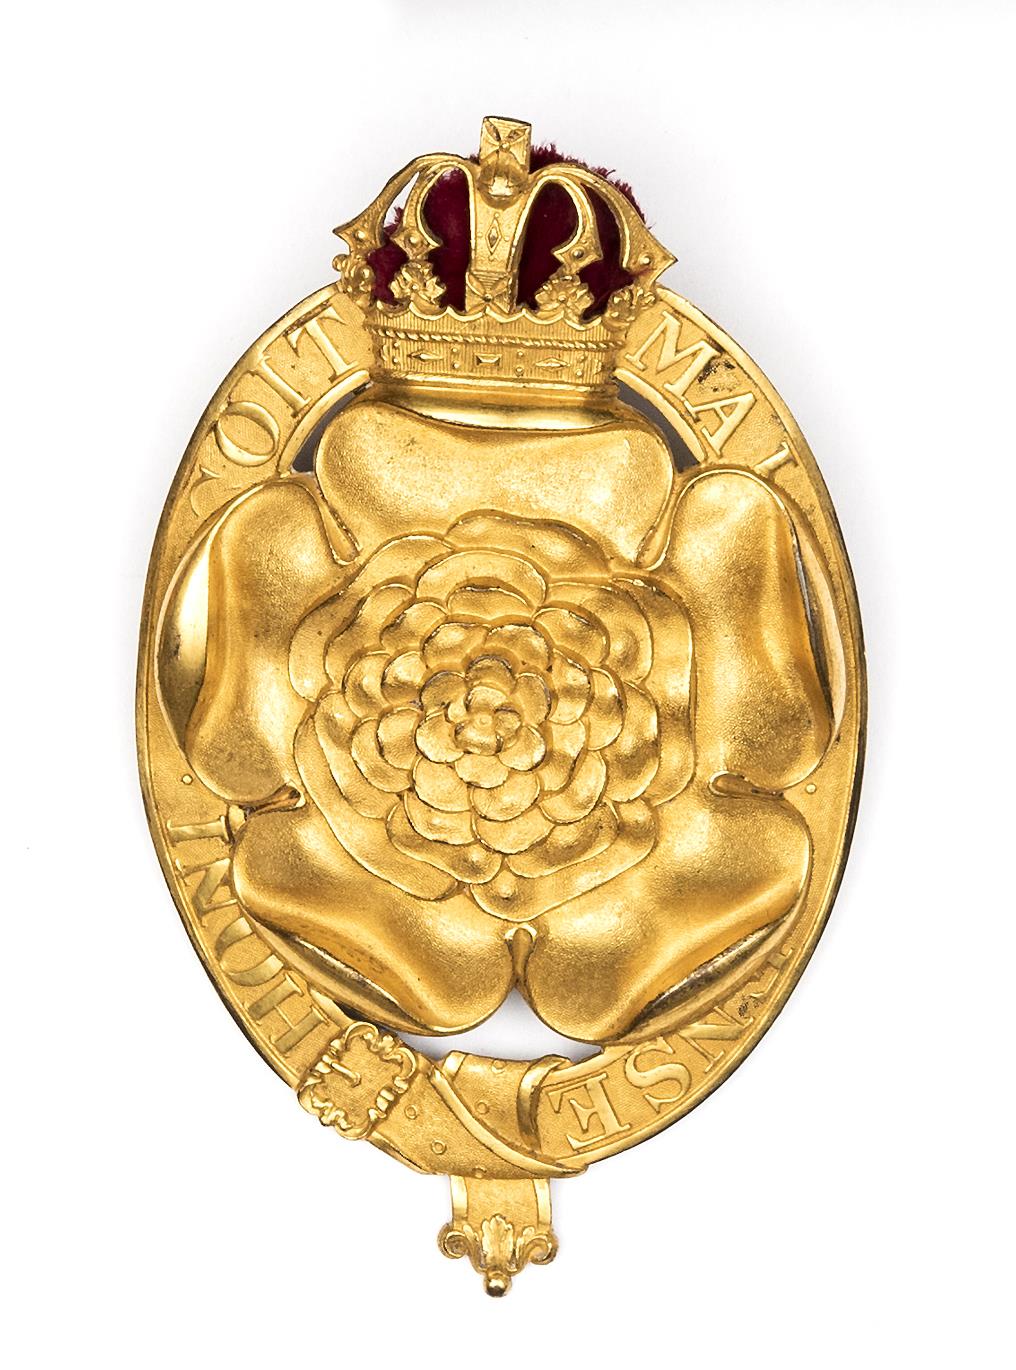 An officer's gilt shako plate of The 7th (or Royal Fusiliers), bearing the Rose on a Guelphic